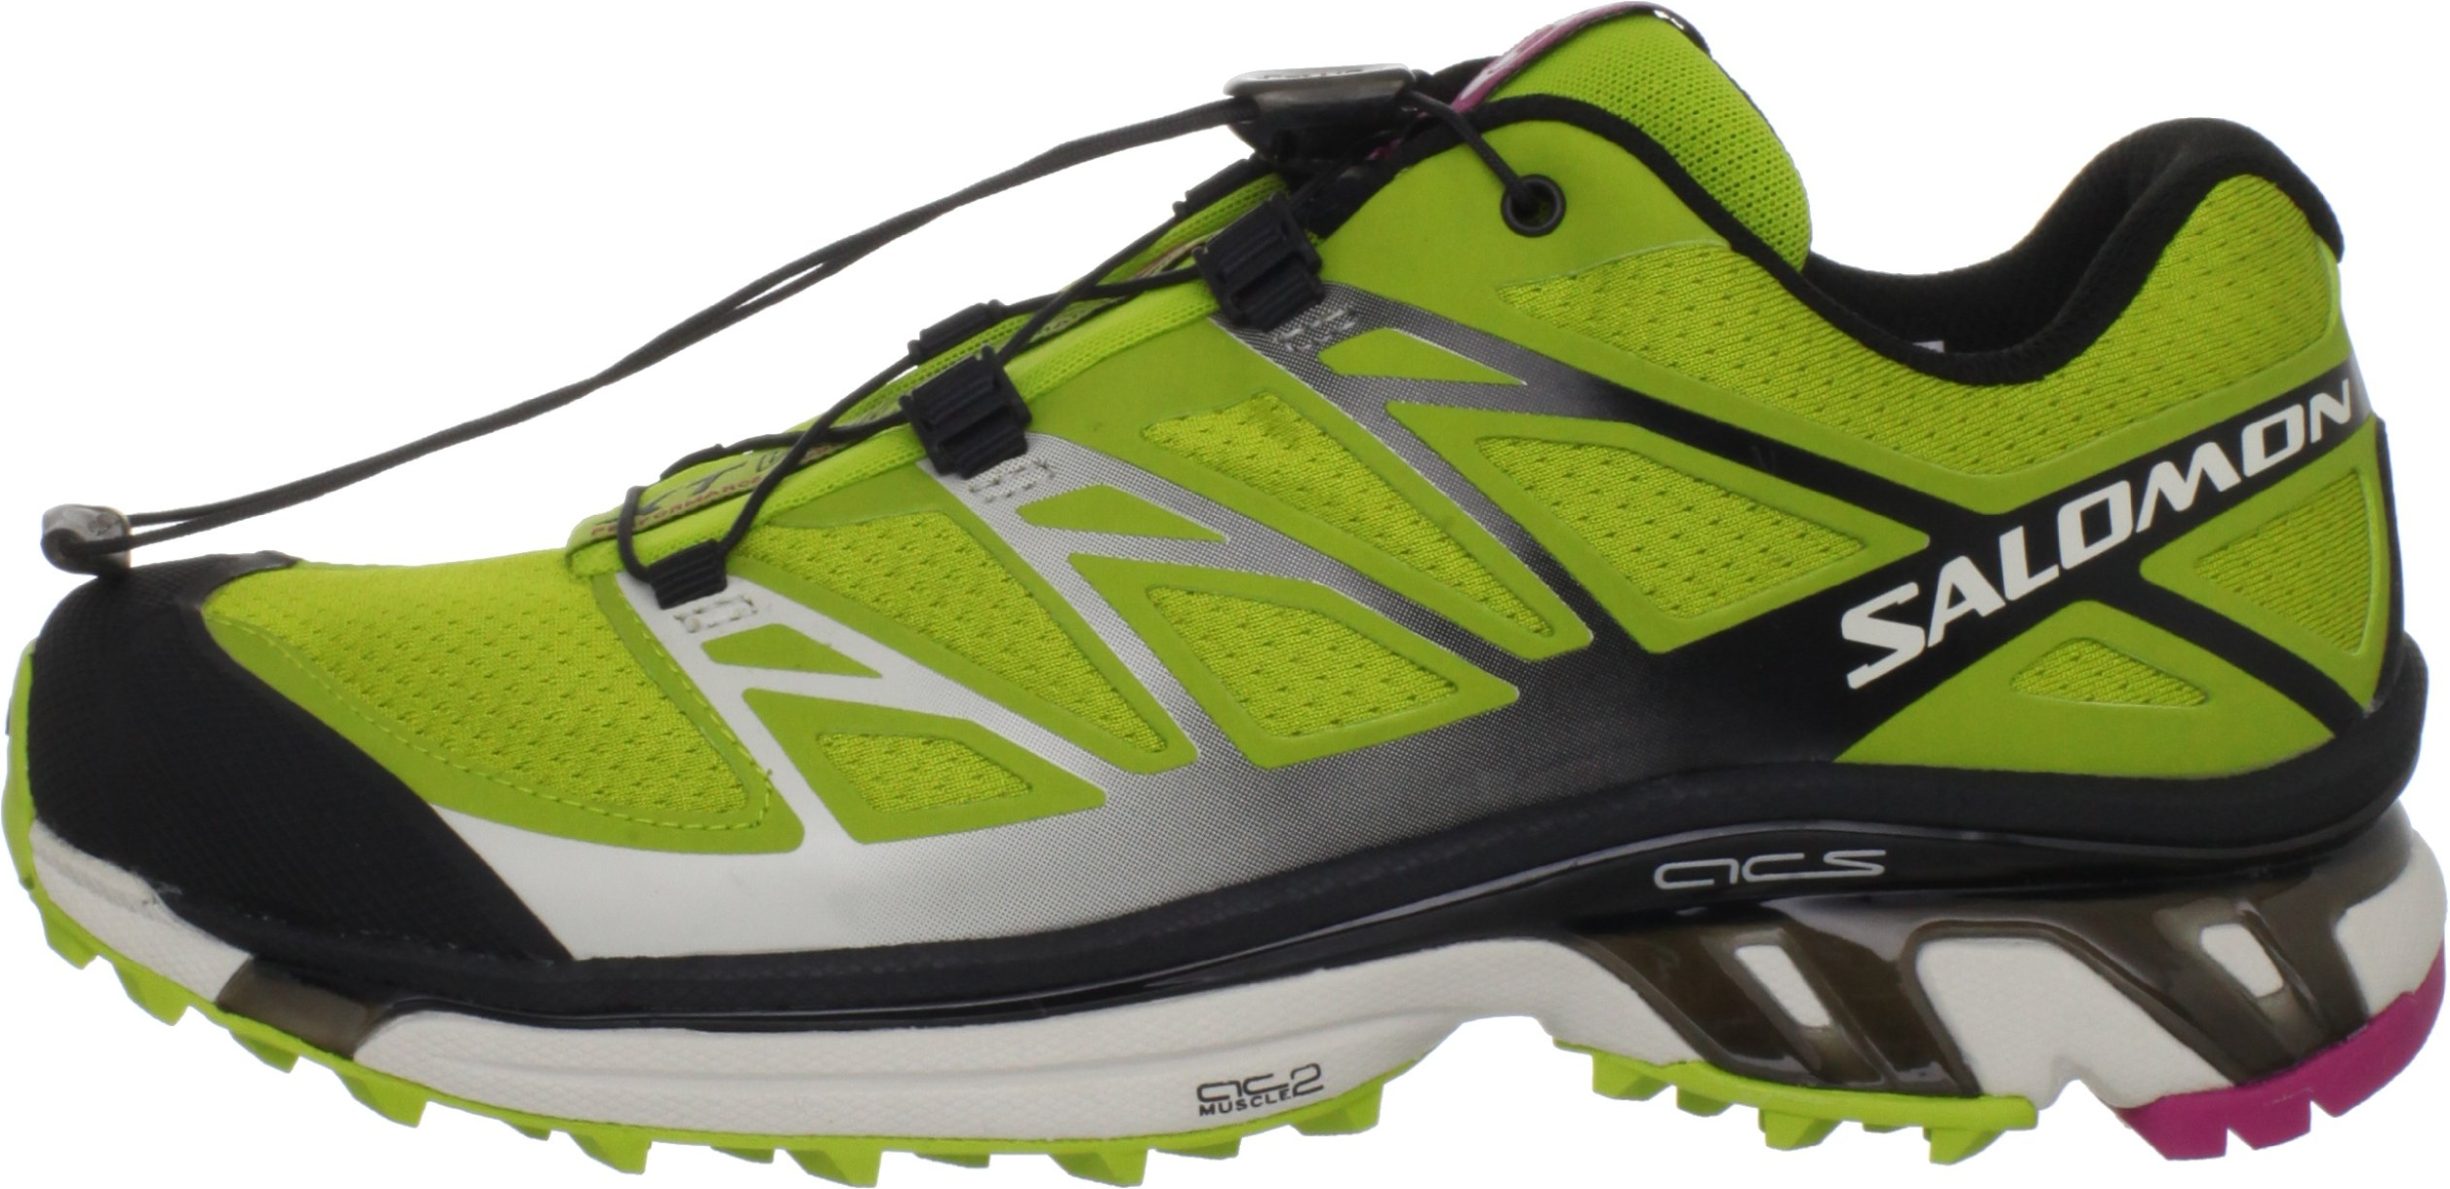 salomon stability trail running shoes